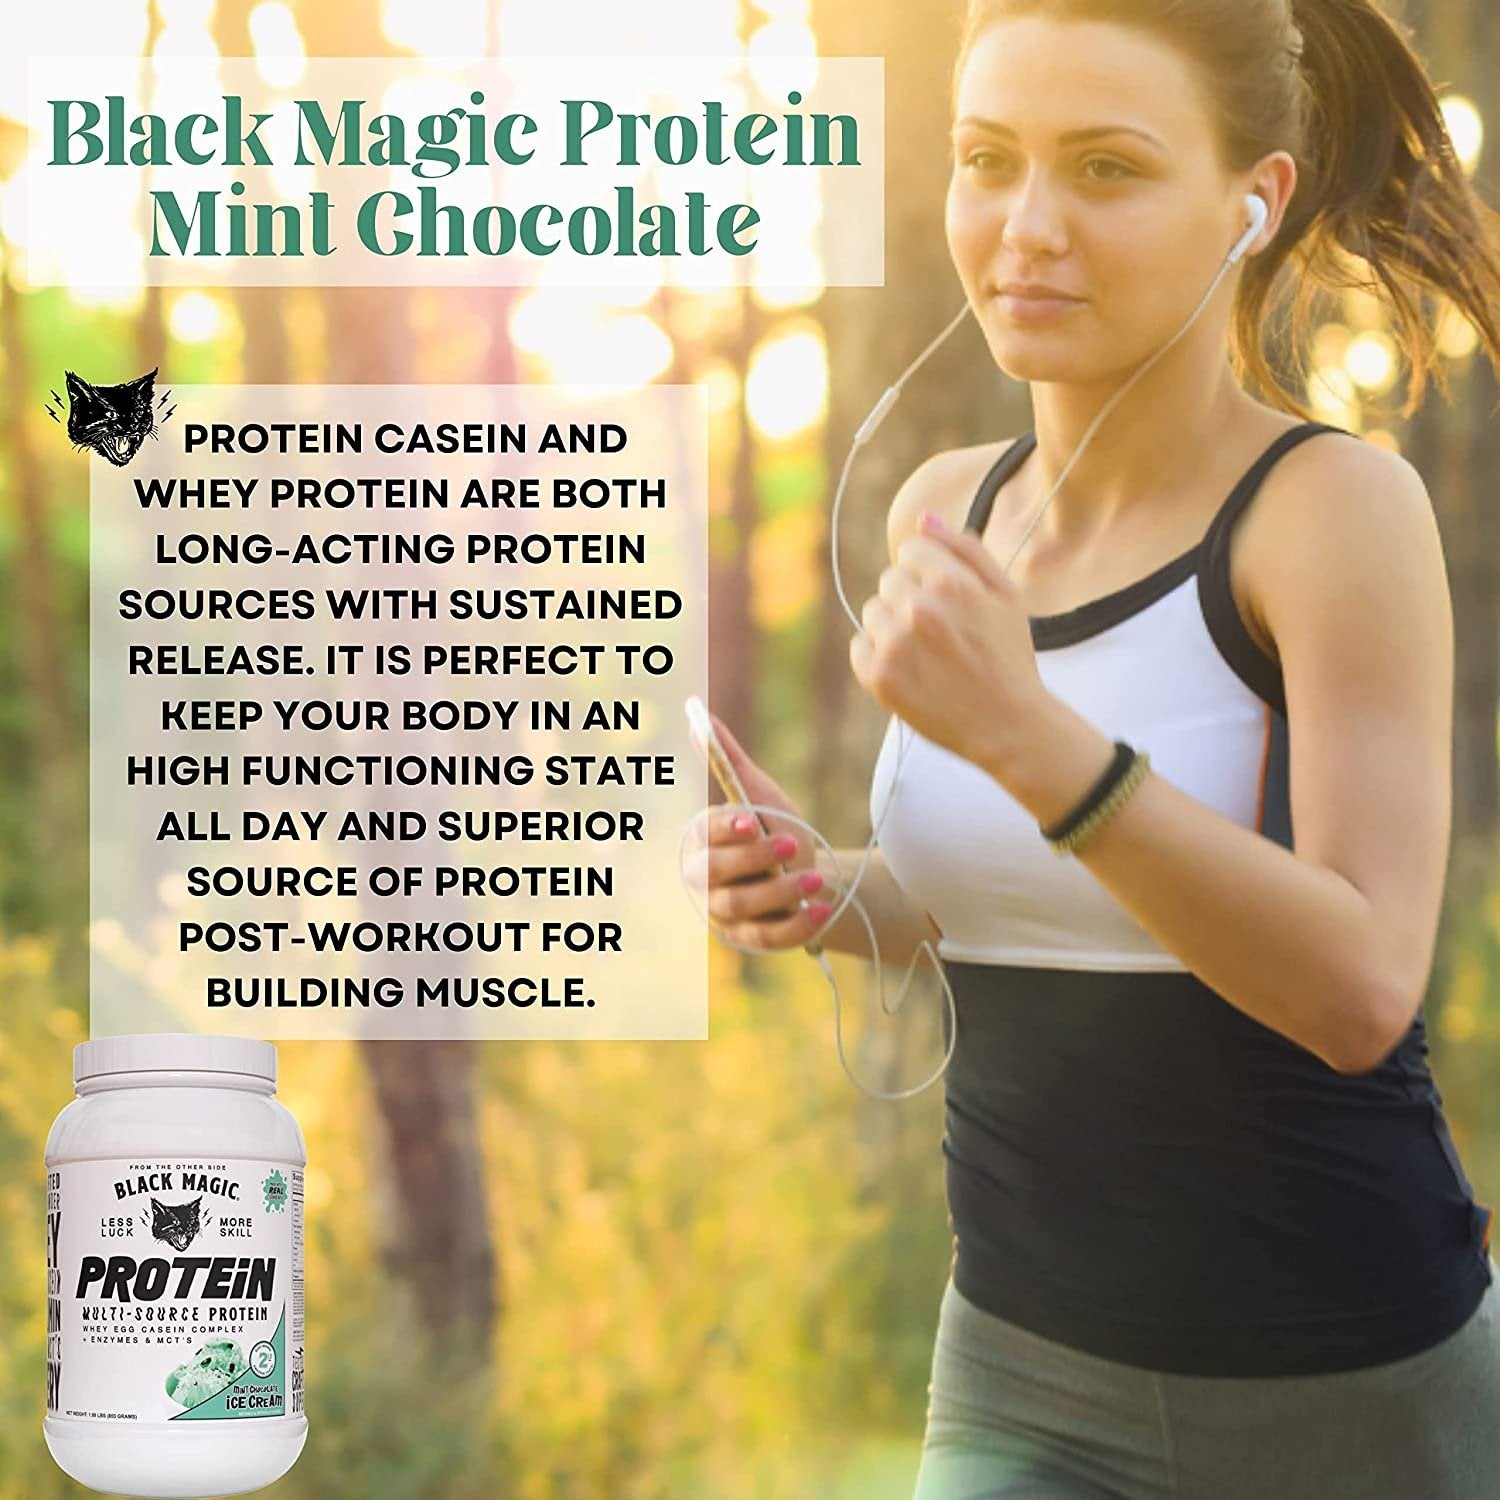 Mint Chocolate Black Magic Multi-Source Protein - Whey, Egg, and Casein Complex with Enzymes & MCT Powder - Pre Workout and Post Workout - 24g Protein - 2 LB with Bonus Key Chain